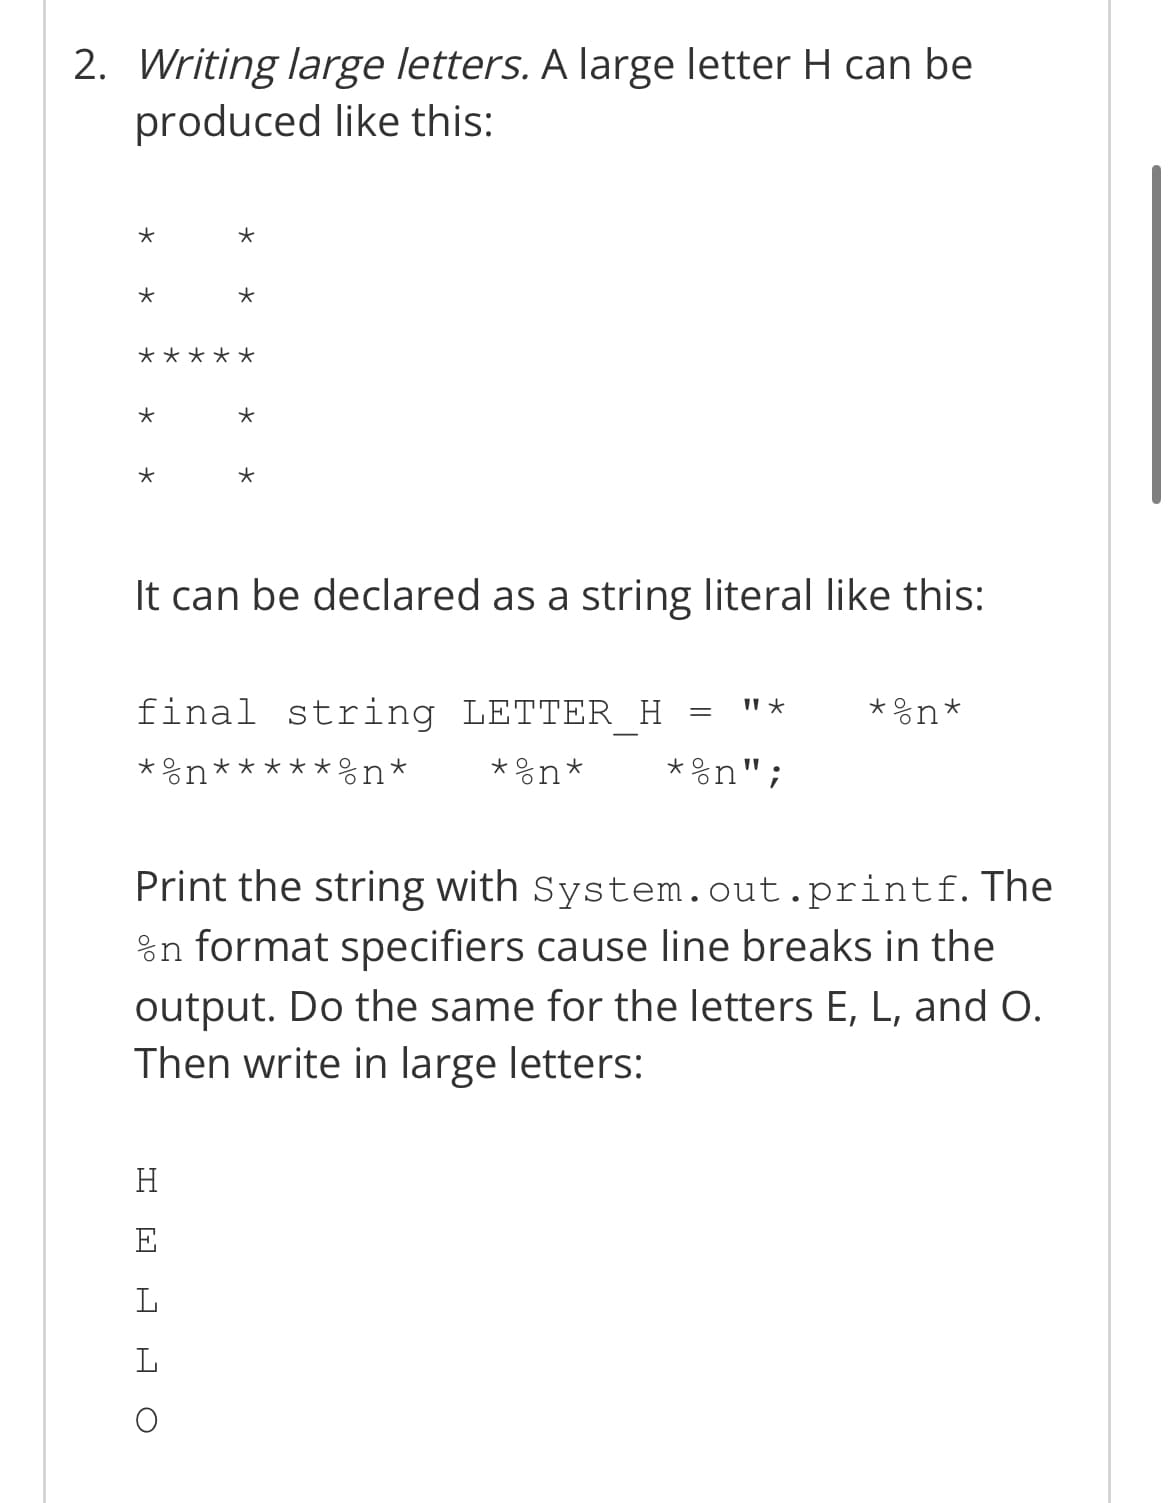 2. Writing large letters. A large letter H can be
produced like this:
*
*
*
*
*
*
It can be declared as a string literal like this:
11 ★
=
*on*
final string LETTER_H
*n*****n* * %n*
*%n";
Print the string with
System.out.printf. The
in format specifiers cause line breaks in the
output. Do the same for the letters E, L, and O.
Then write in large letters:
H
L
L
*
O